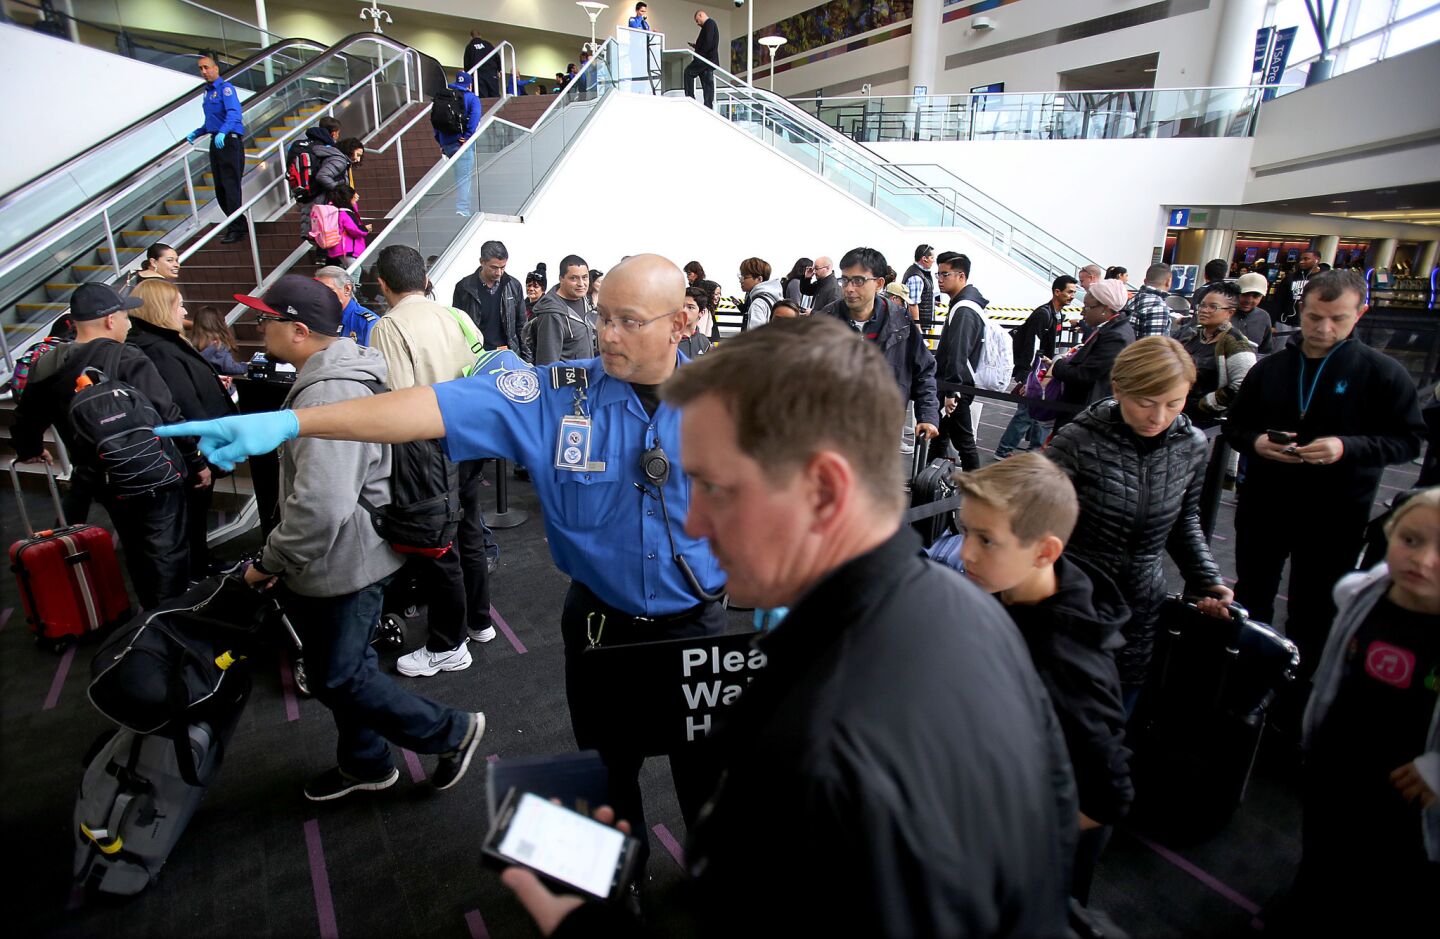 A TSA agent guides holiday travelers through a security checkpoint in Terminal 2 at LAX on Thursday, one of the busiest travel days of the year.